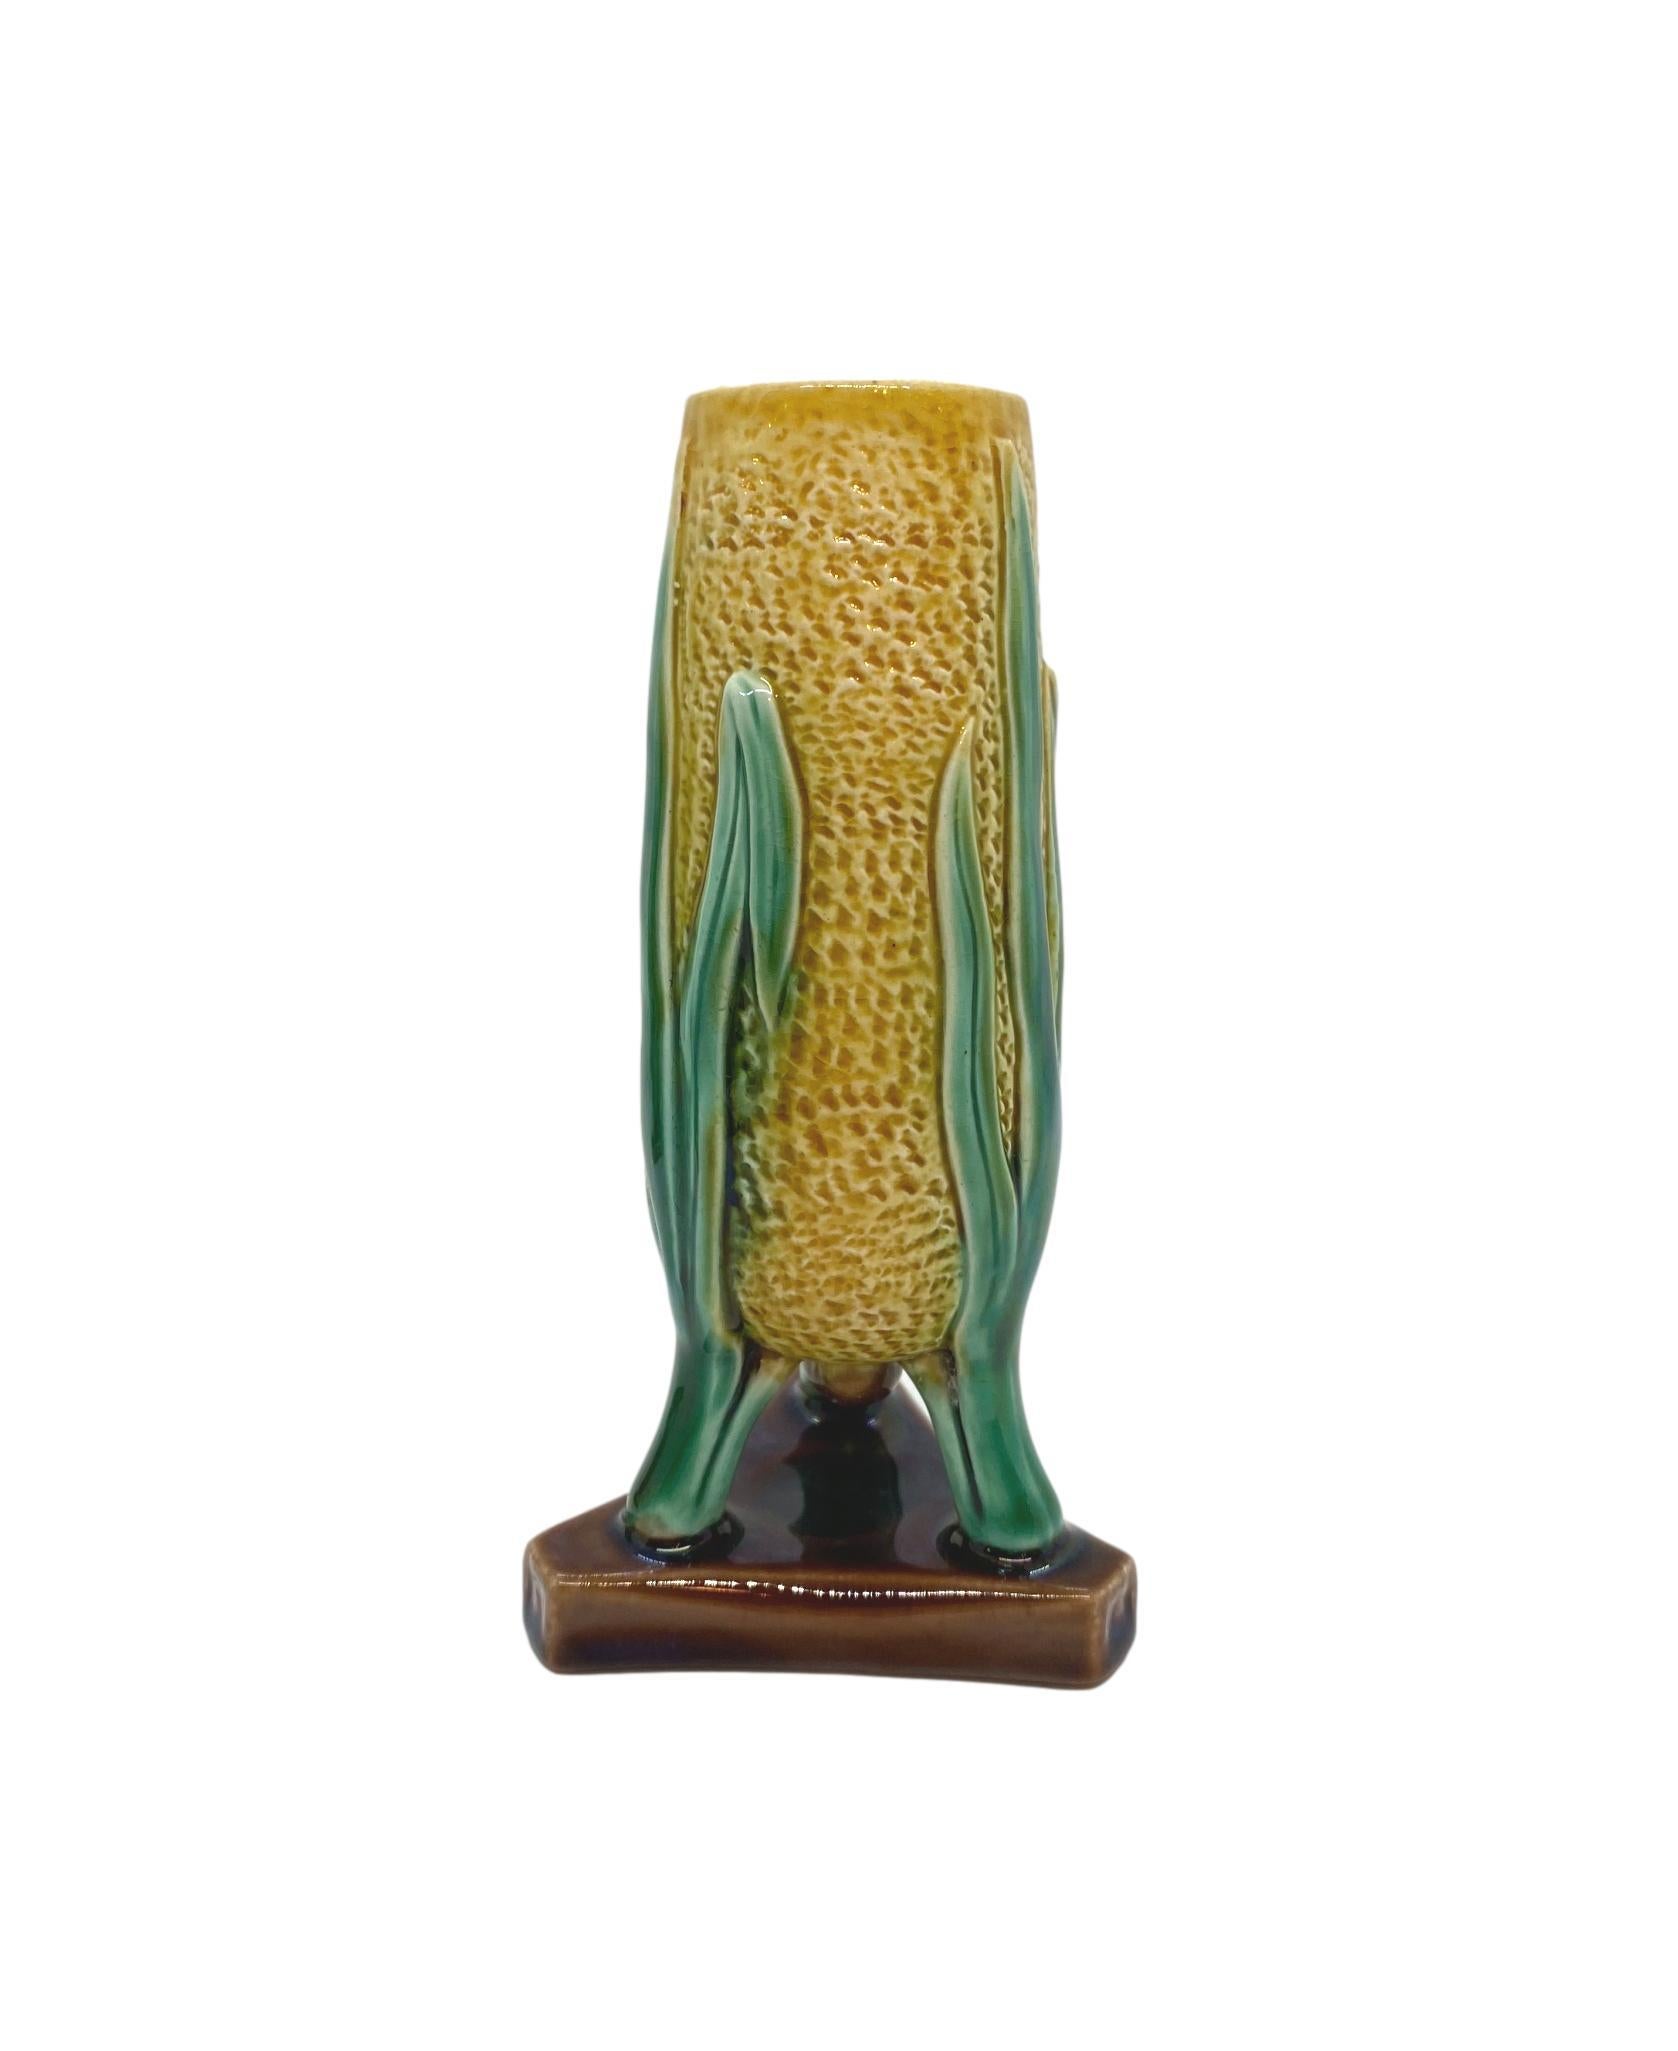 English Majolica 5-in Vase/Posy Holder, of amphora form on tripod with pedestal base, molded as yellow glazed ear of corn with green shucks, the interior glazed in pink, ca. 1875 
For 30 years we have been among the world's preeminent specialists